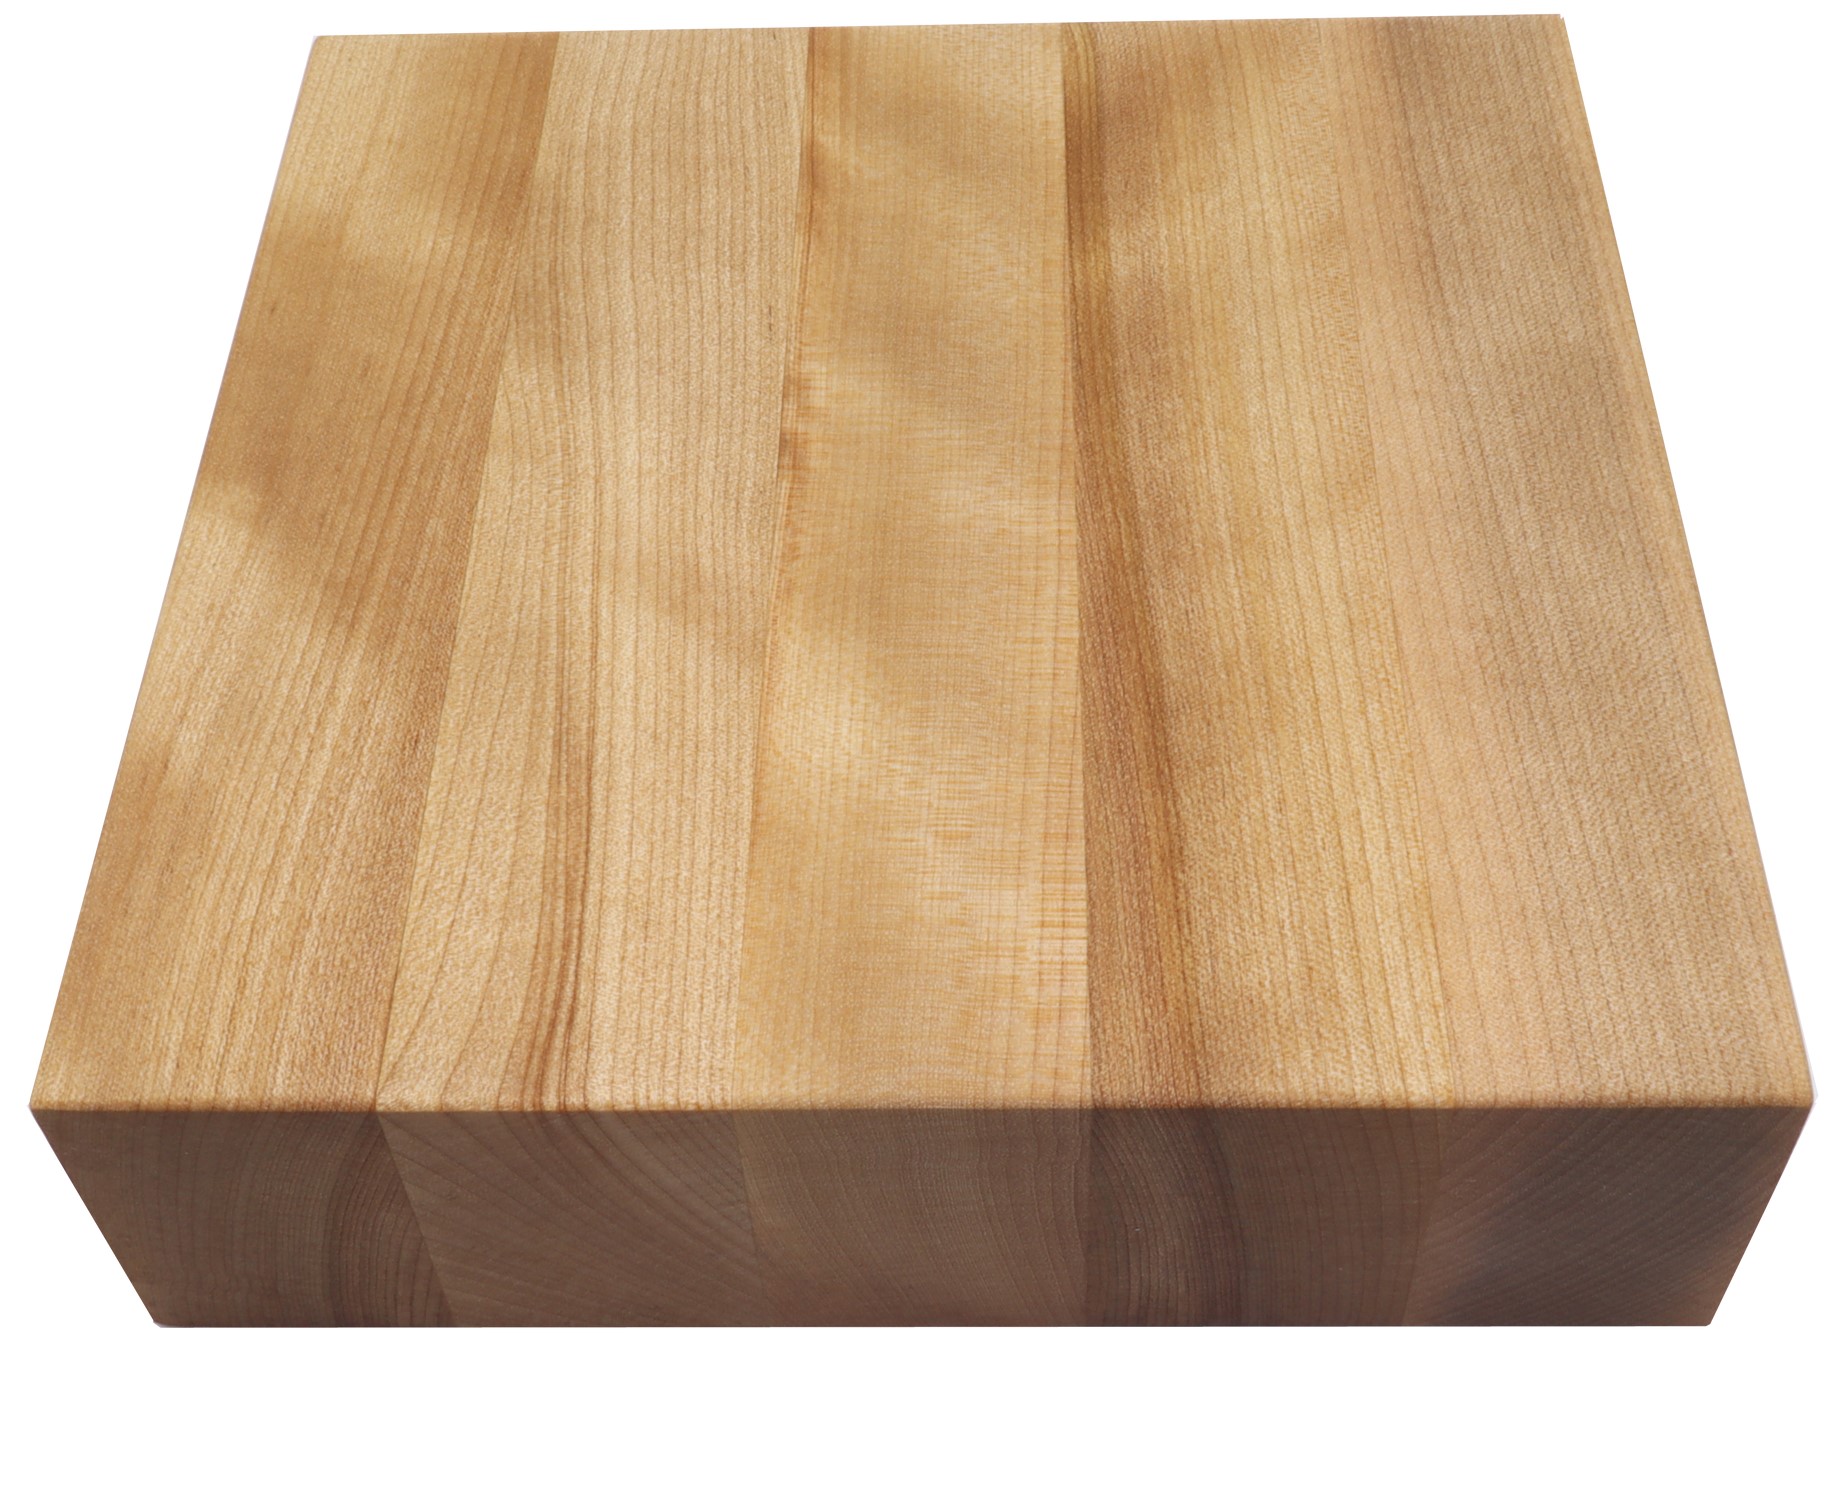 Image Sample of solid wood - common yellow birch oil finish